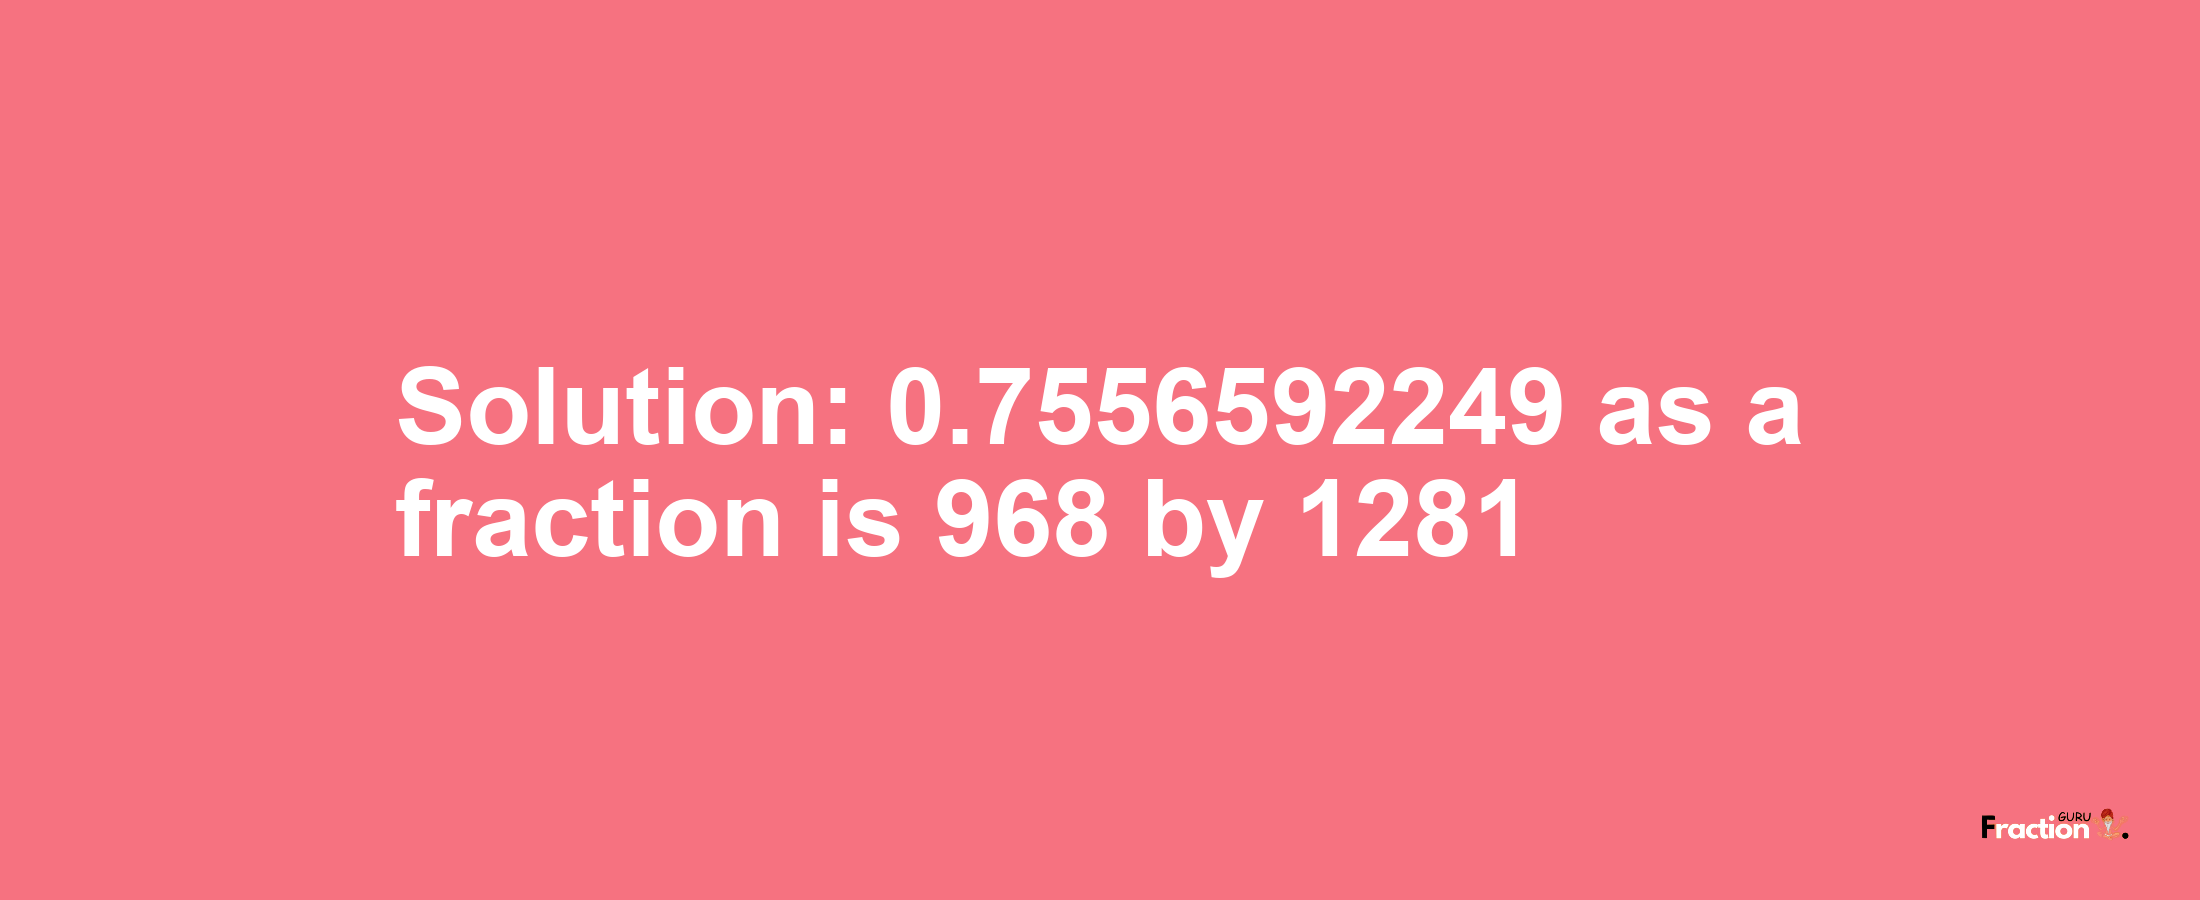 Solution:0.7556592249 as a fraction is 968/1281